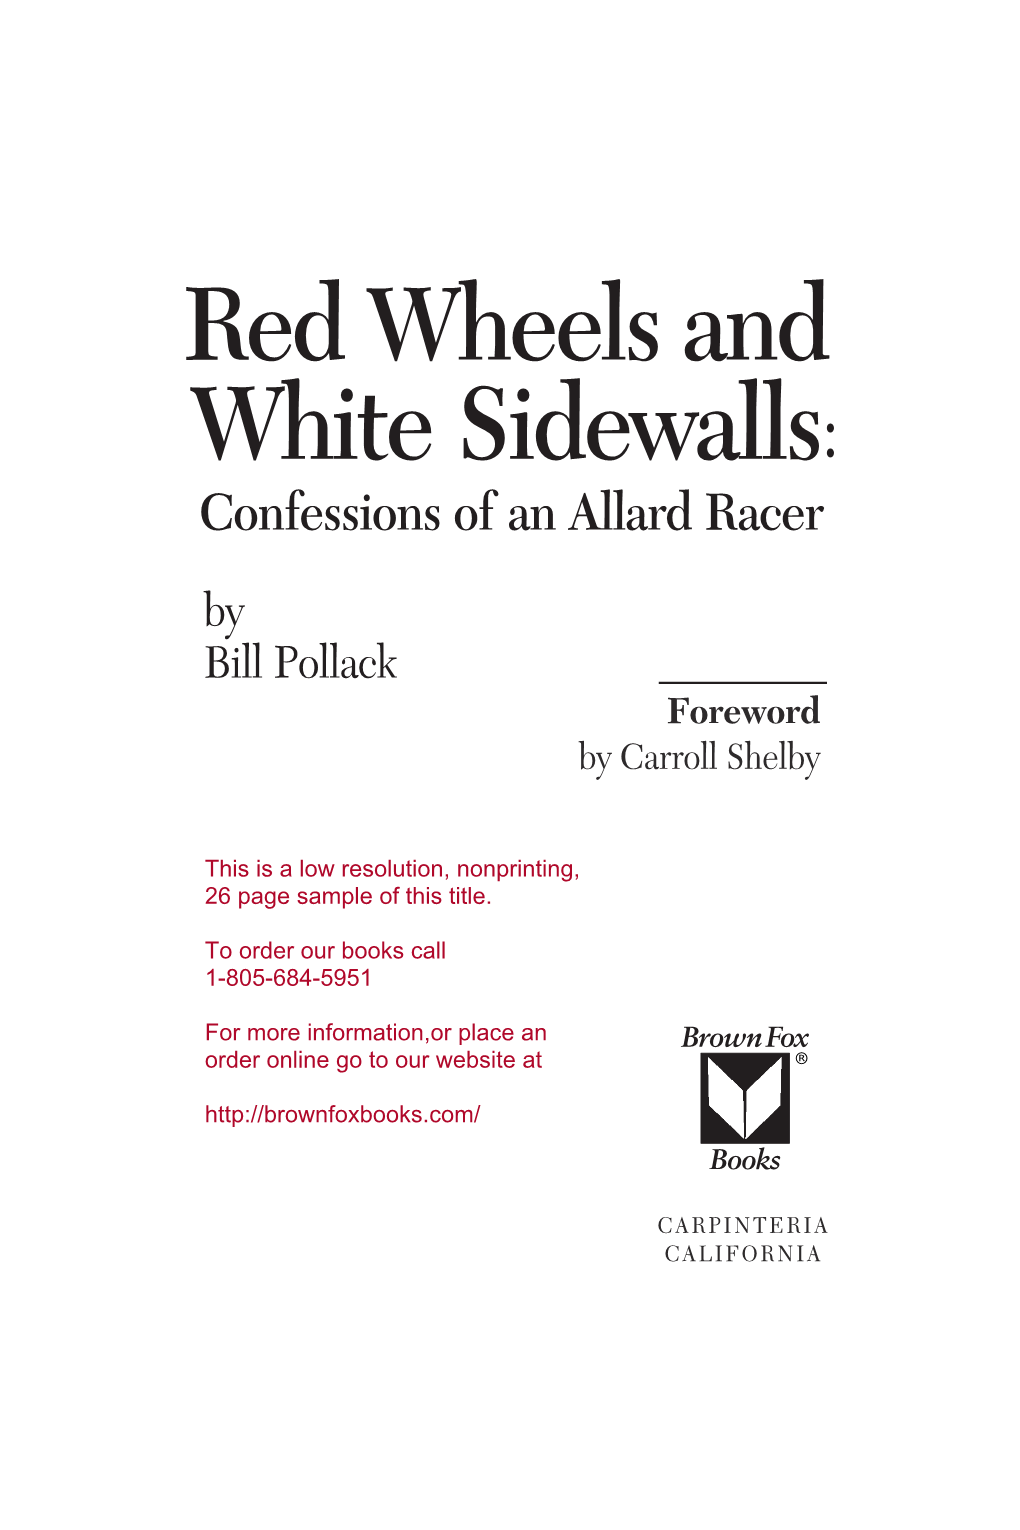 Red Wheels and White Sidewalls: Confessions of an Allard Racer by Bill Pollack Foreword by Carroll Shelby